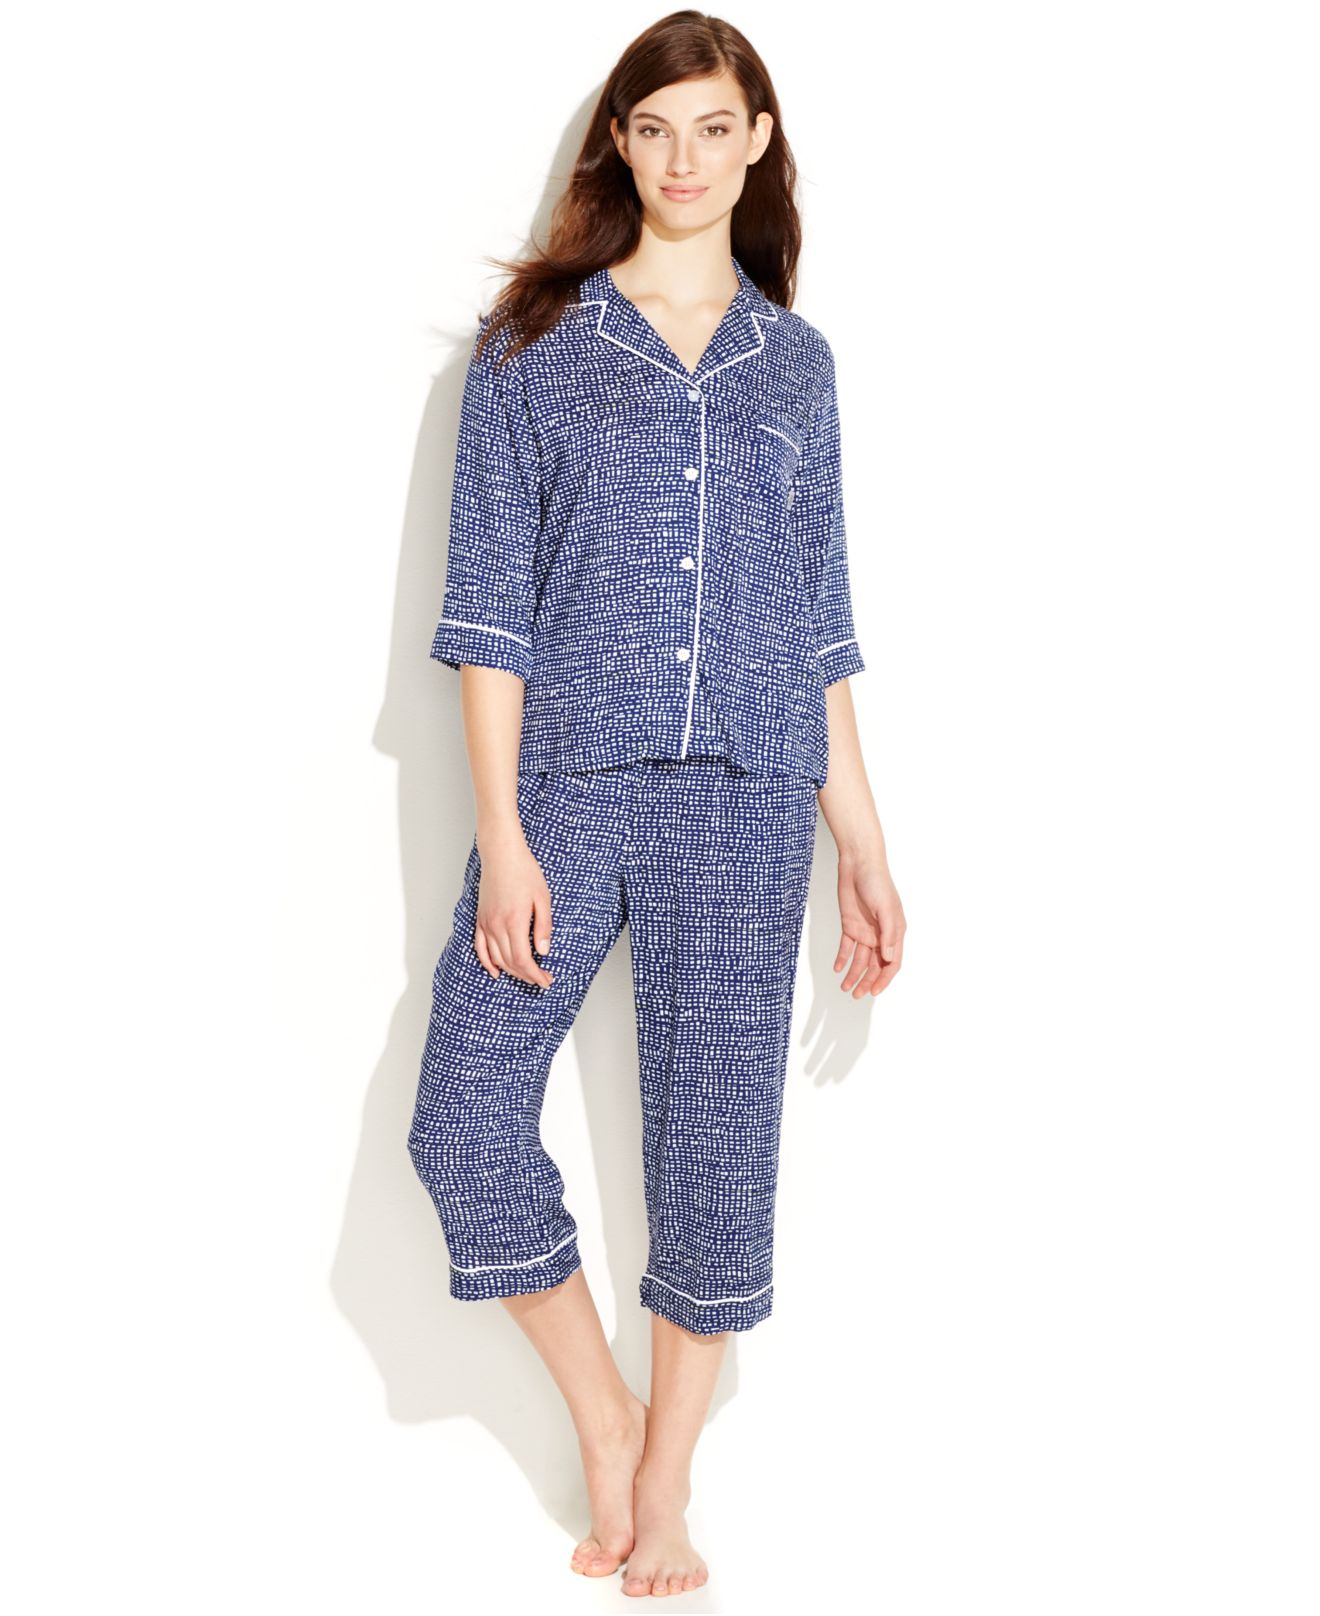 Lyst - Dkny Notch Collar Top And Capri Pajama Pants Set in Blue